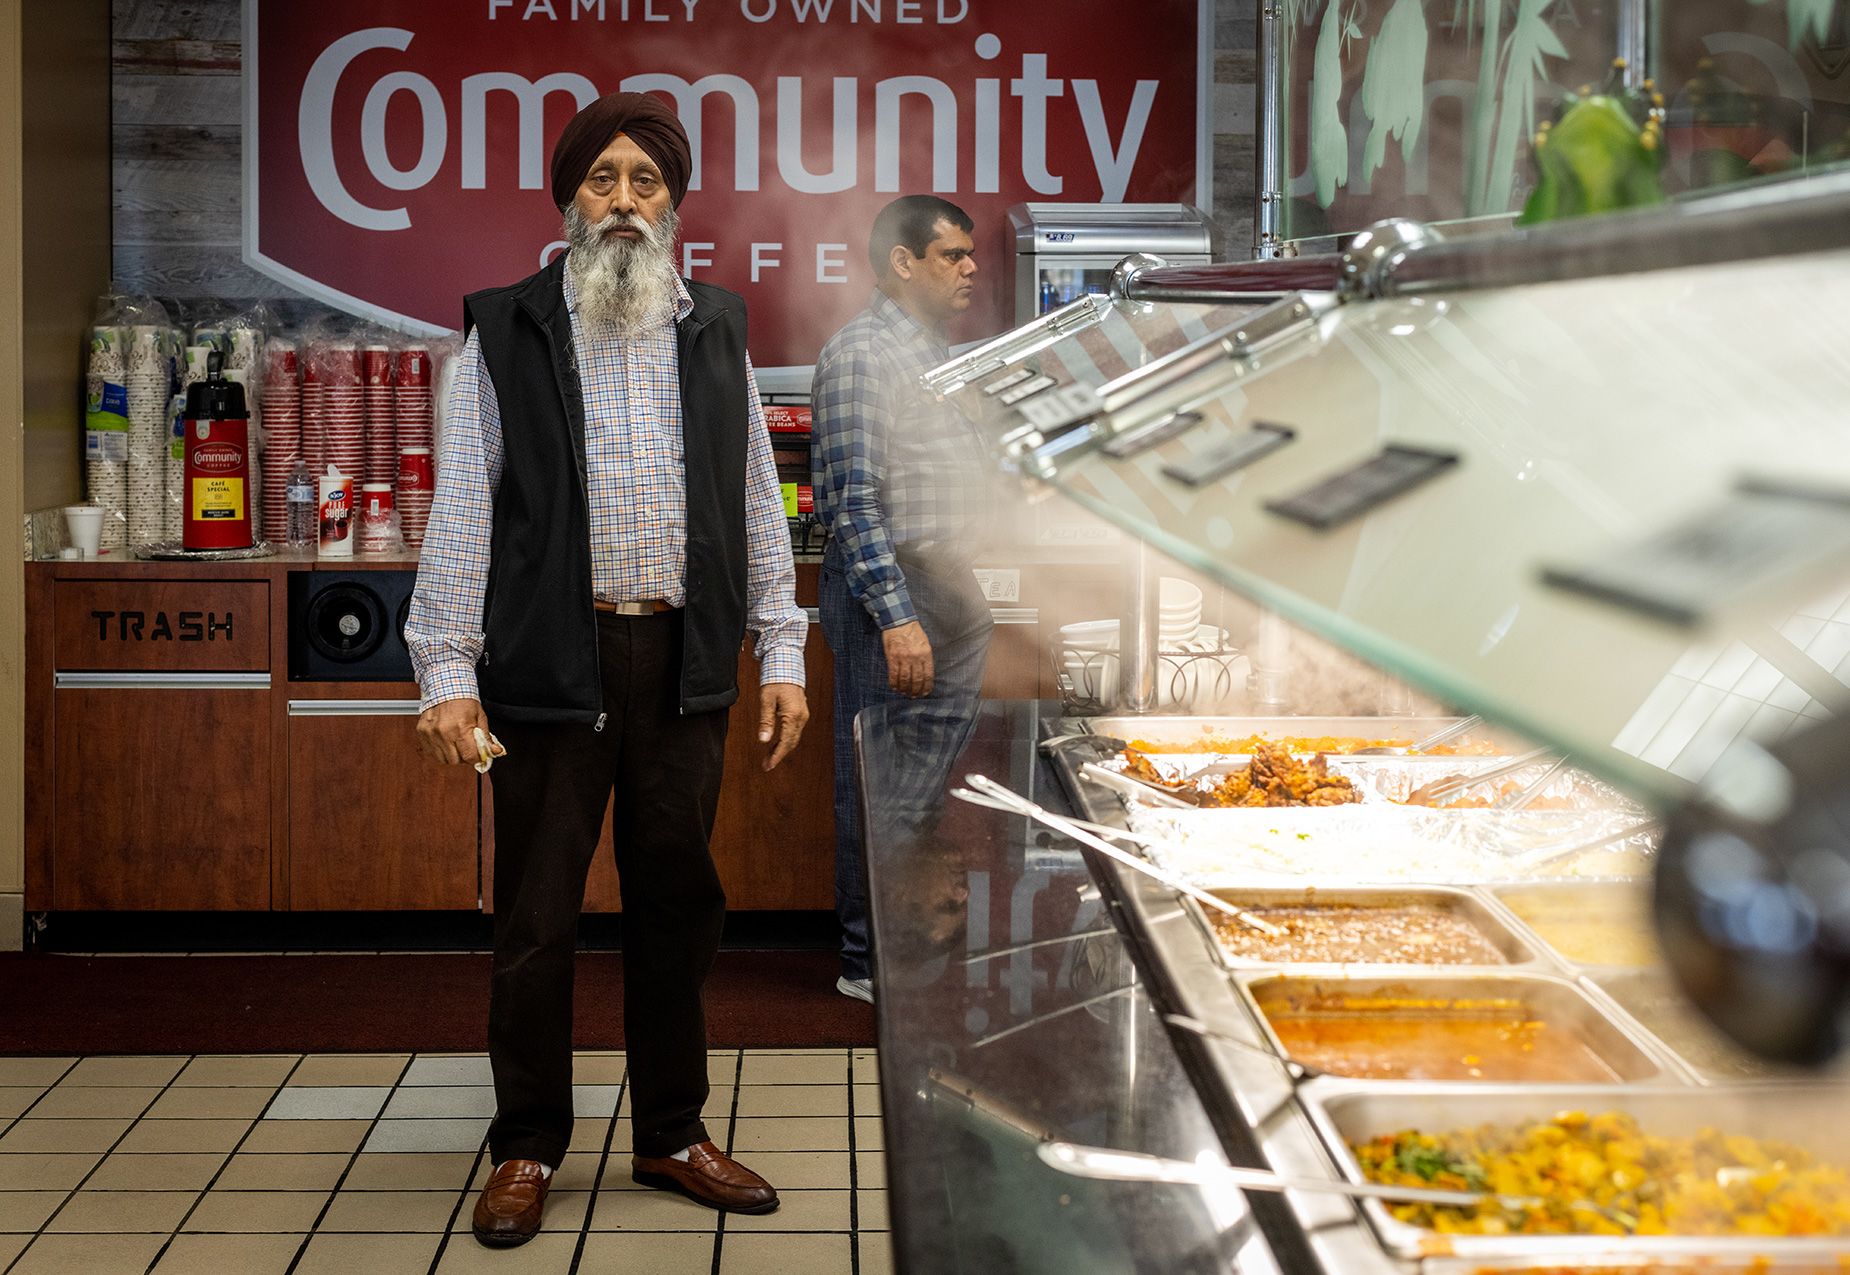 Icebox owner Gurjeet Singh and his business partner opened a Punjabi dhaba in a former Shell station in Hammond, Louisiana. Originally from Chandigarh, India, Singh wanted to serve Indian truck drivers along I-55 and I-12, according to Medley's book.